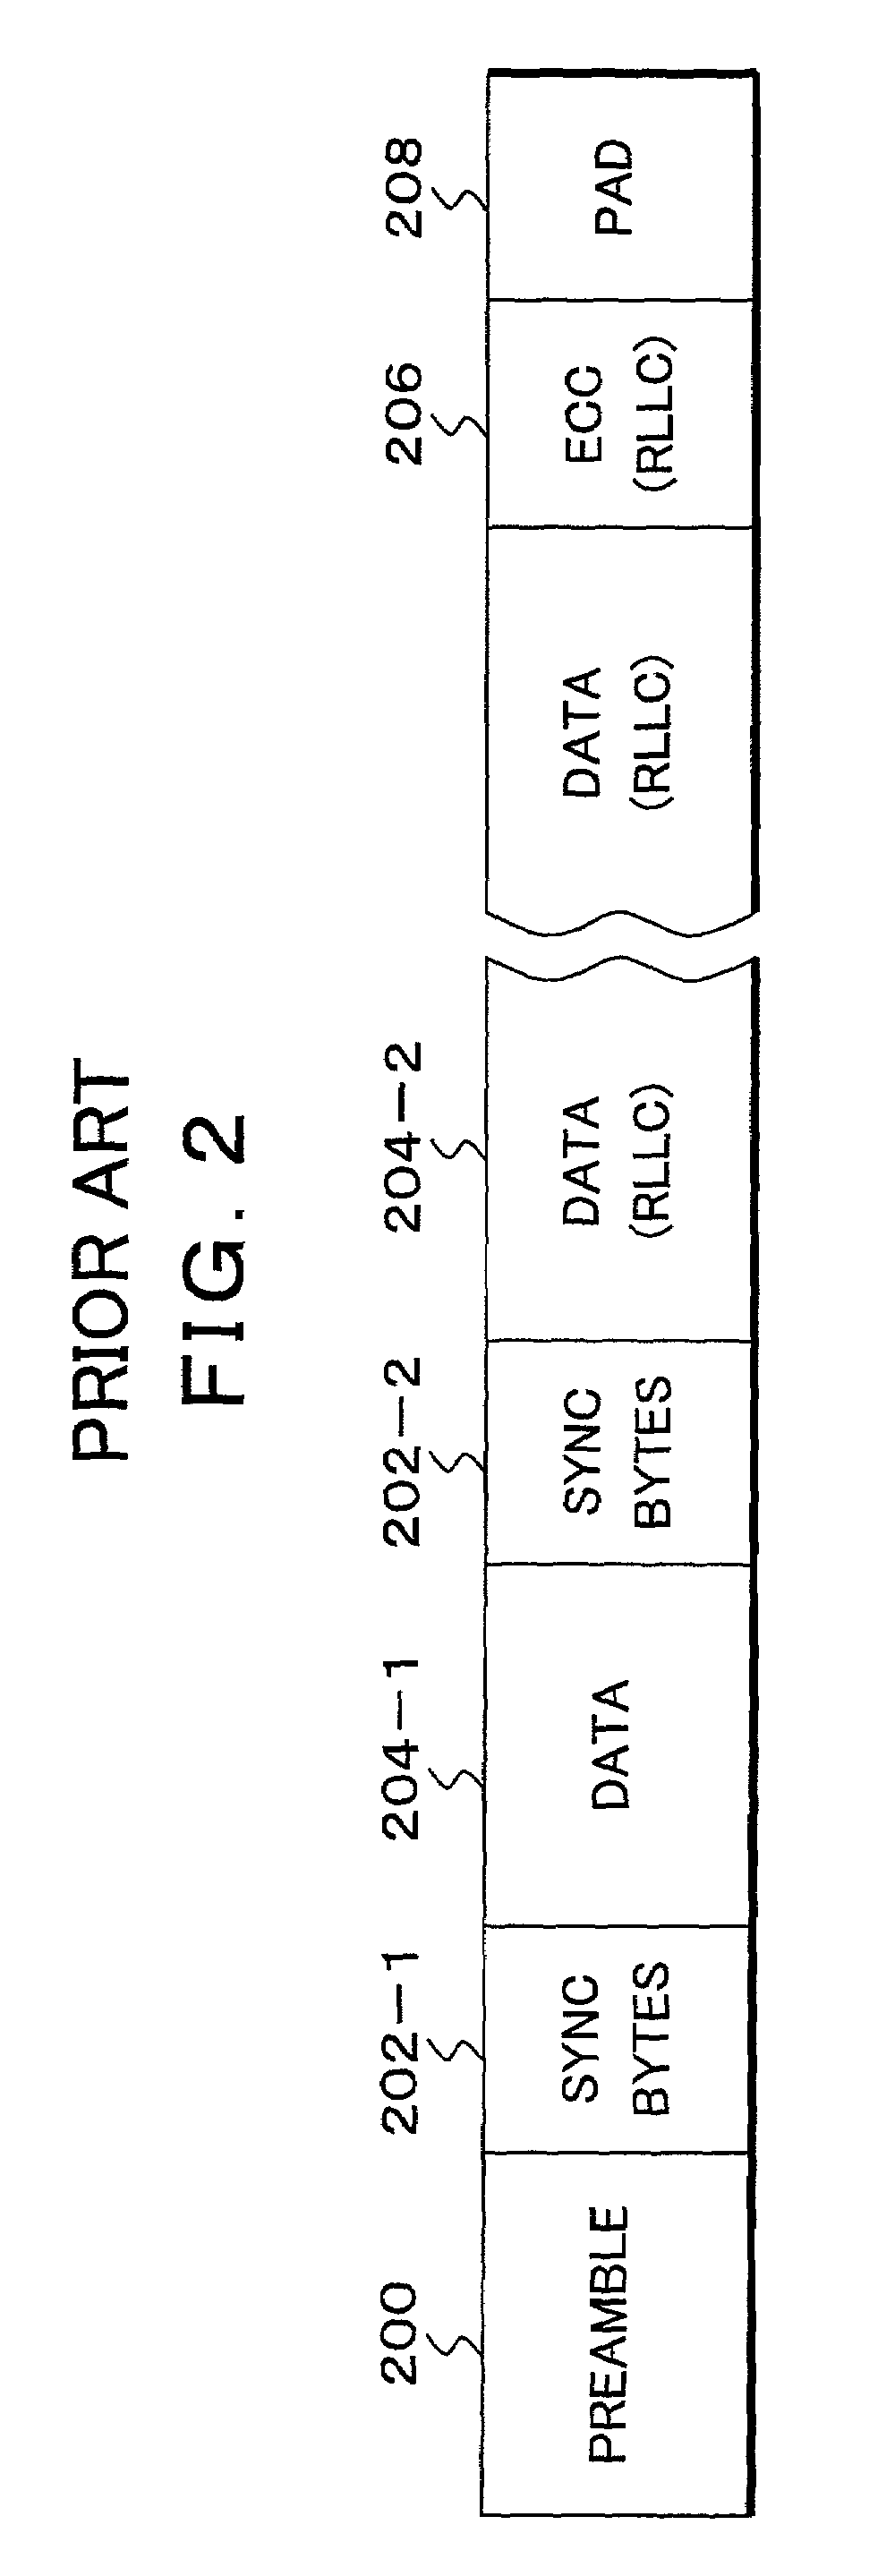 Information recording and reproducing apparatus, signal decoding circuit, and information recording medium and method